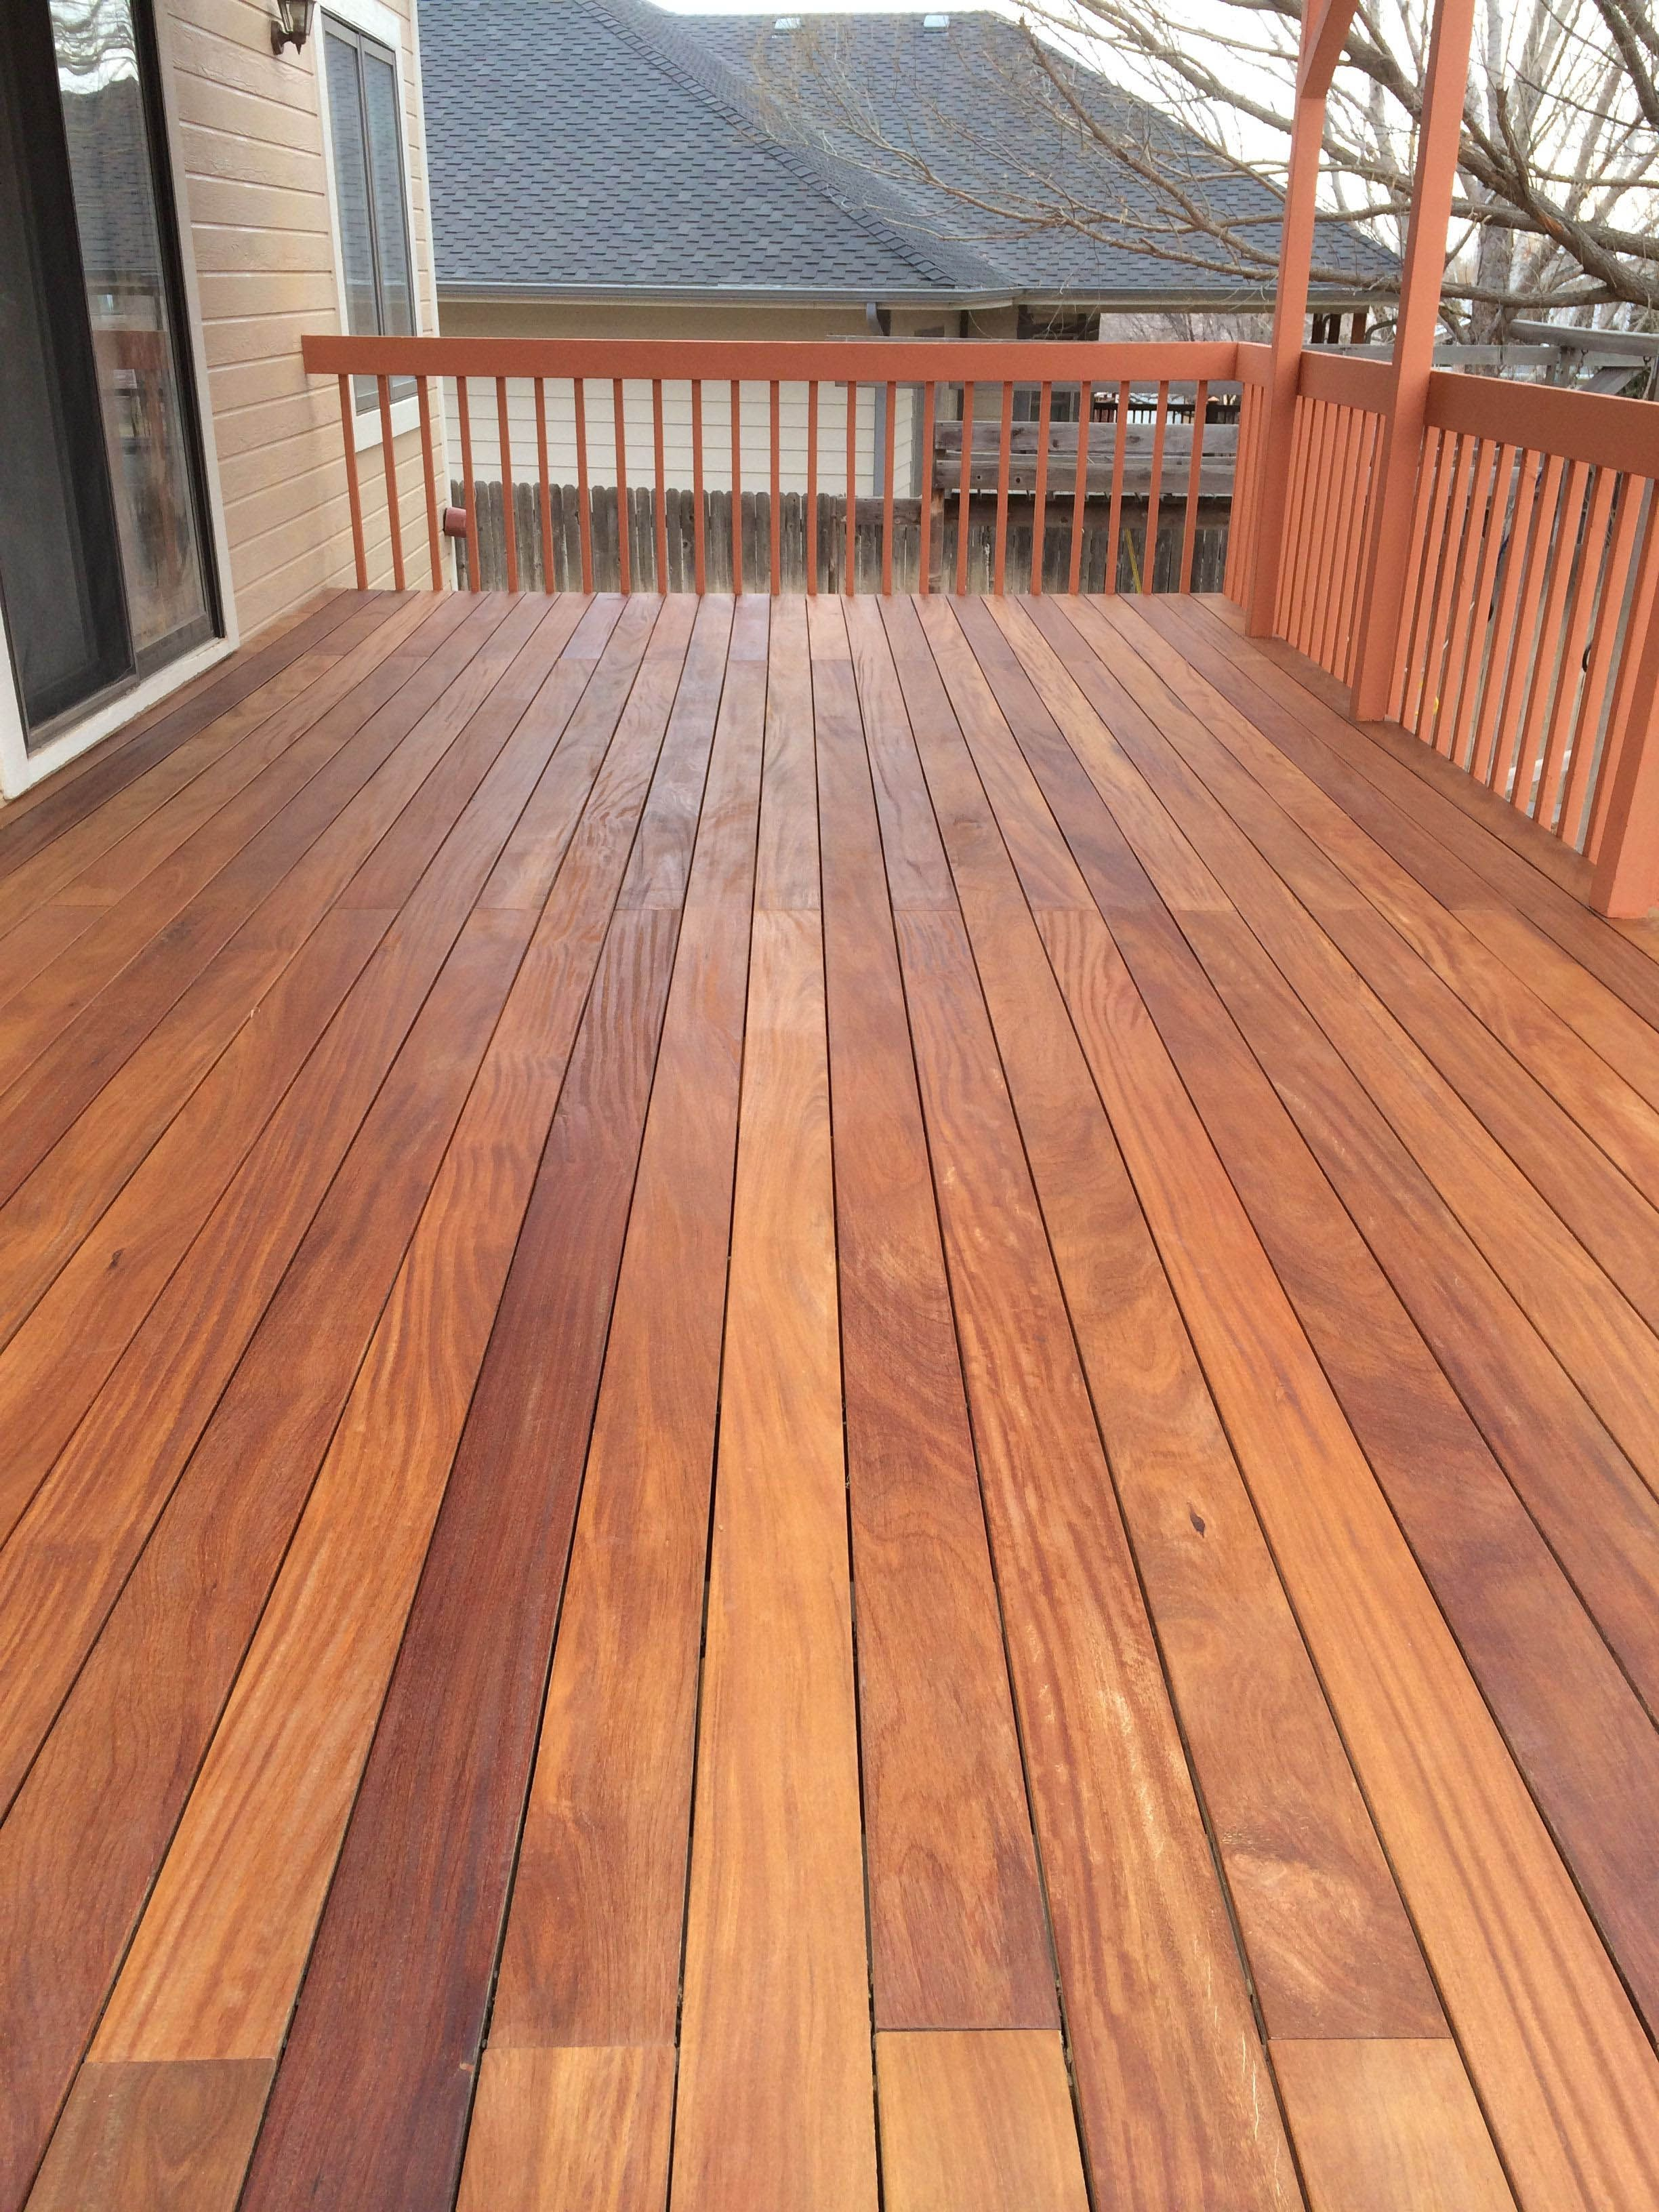 Deck Stain Color Ideas Best Deck Stain Deck Stain Colors Best with regard to size 2448 X 3264